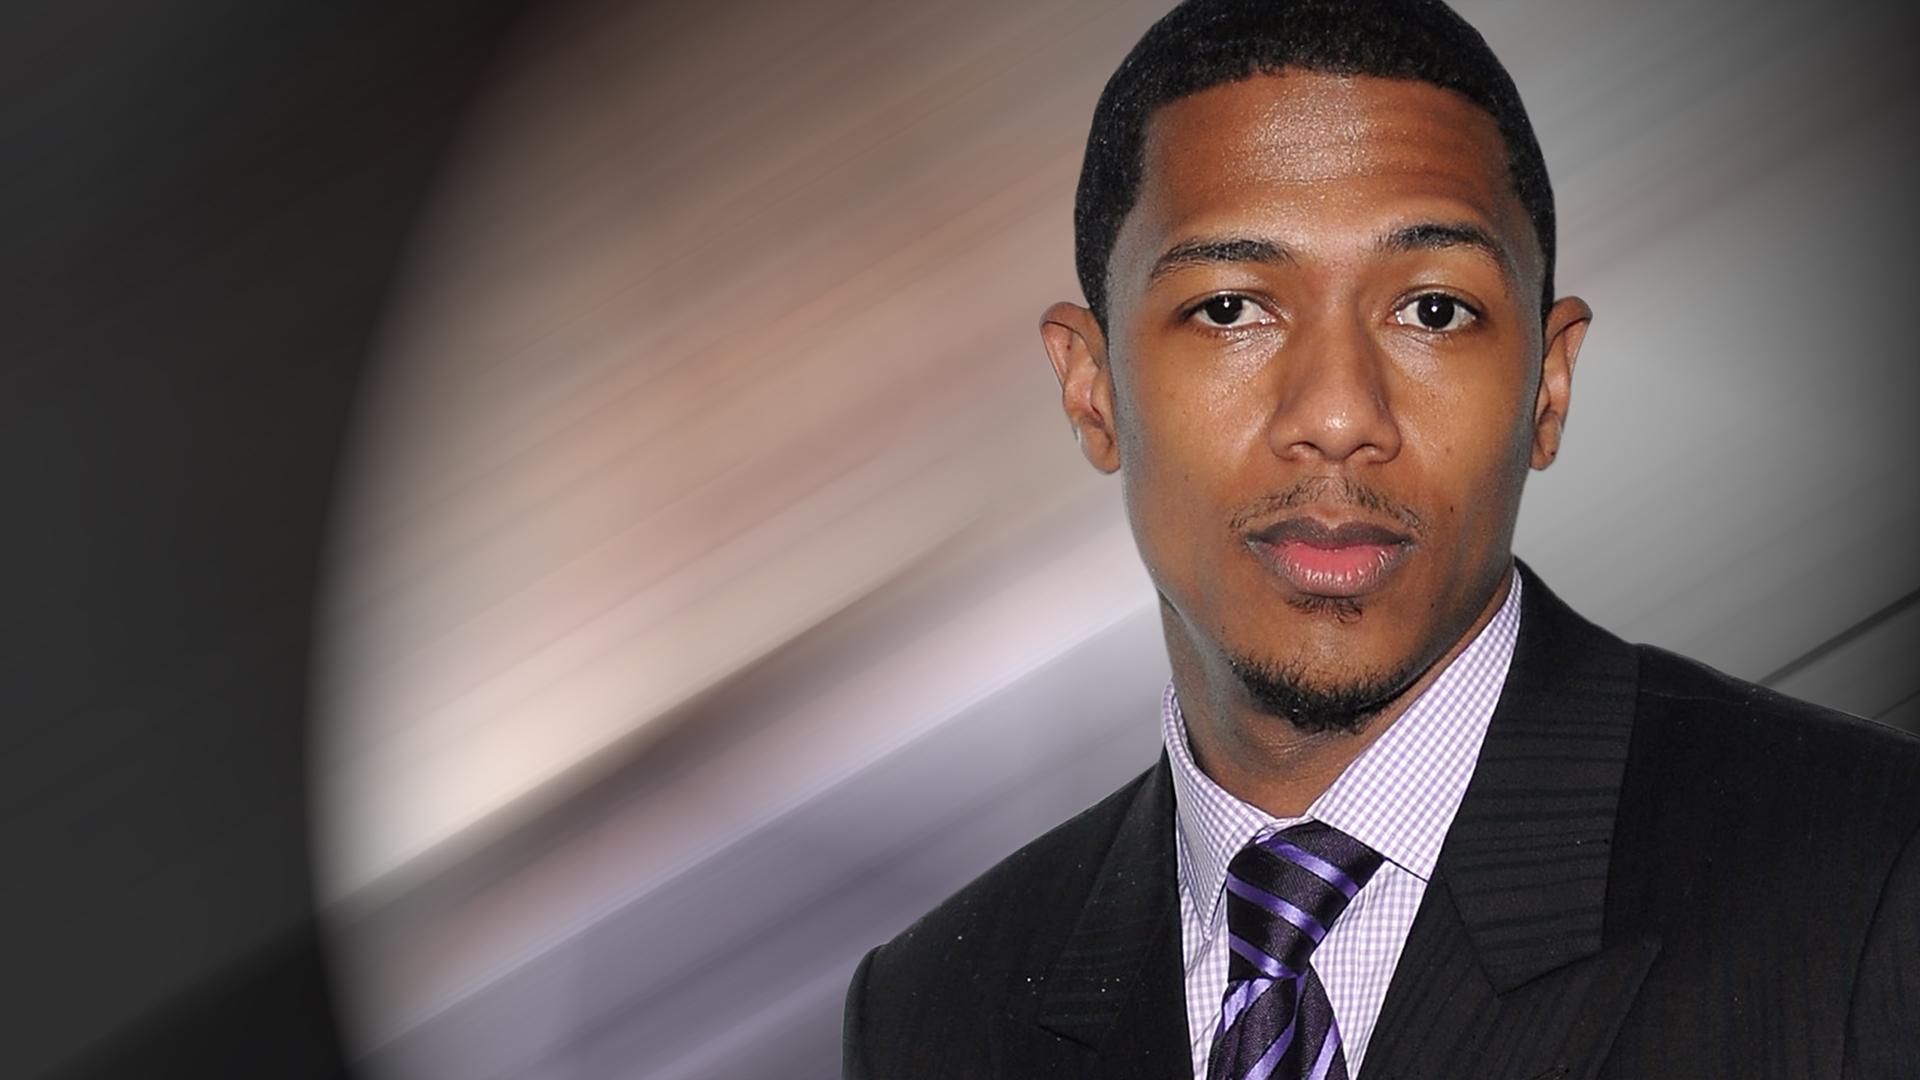 Nick Cannon Wallpapers Image Photos Pictures Backgrounds.